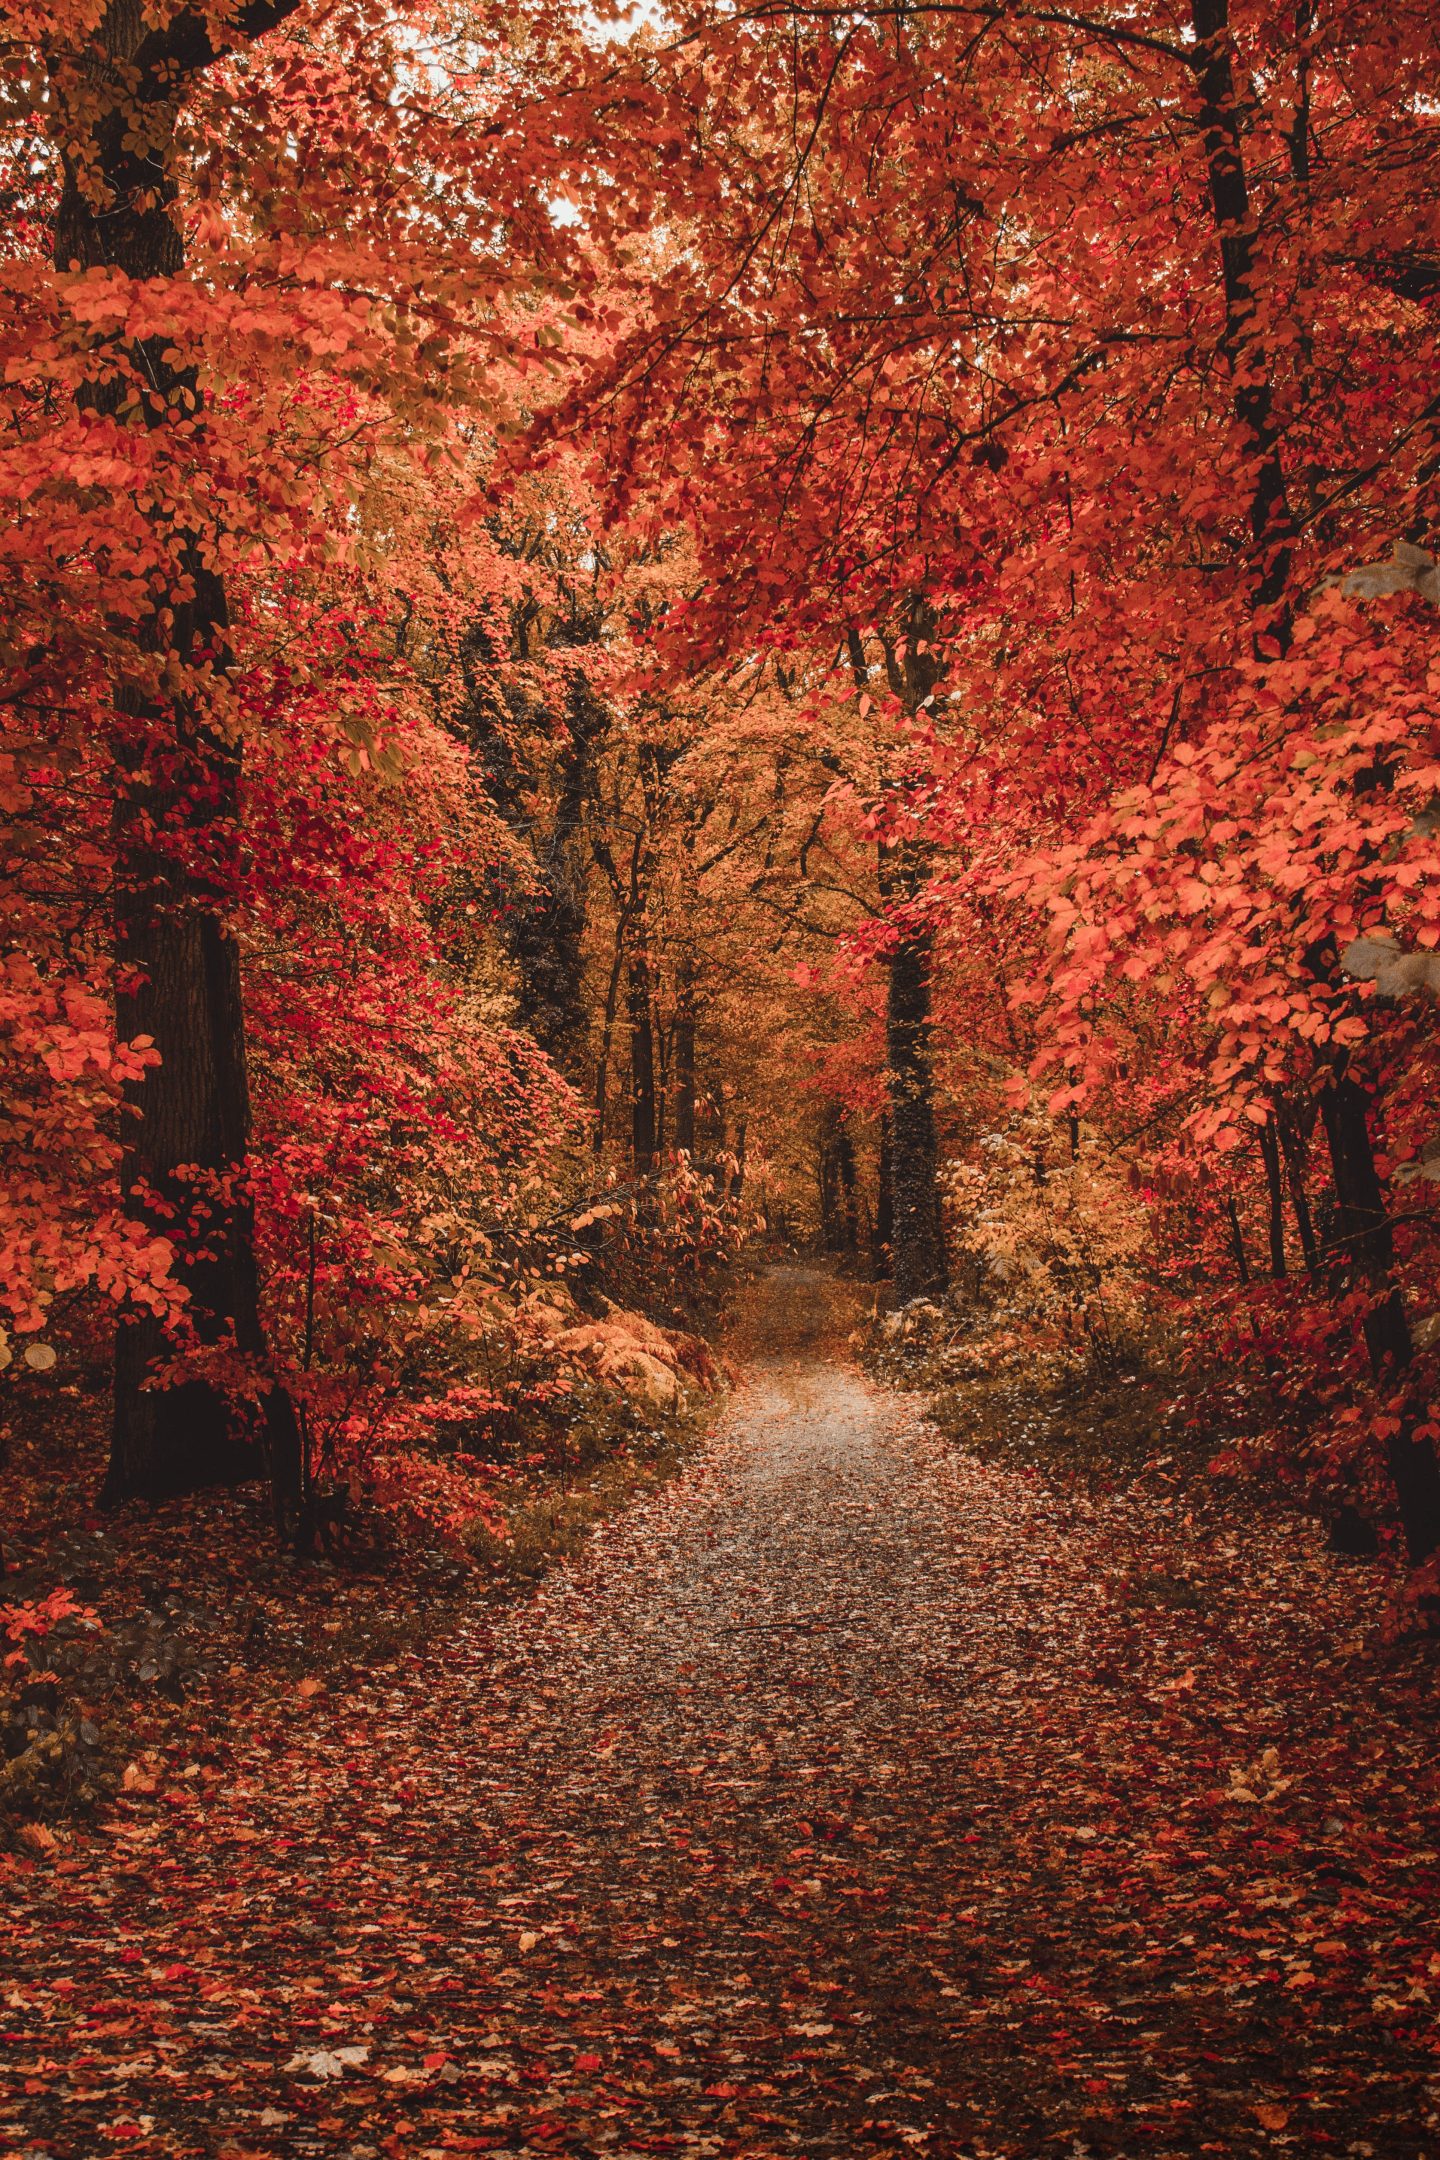 A pathway in the woods surrounded by trees with red leaves. - Fall iPhone